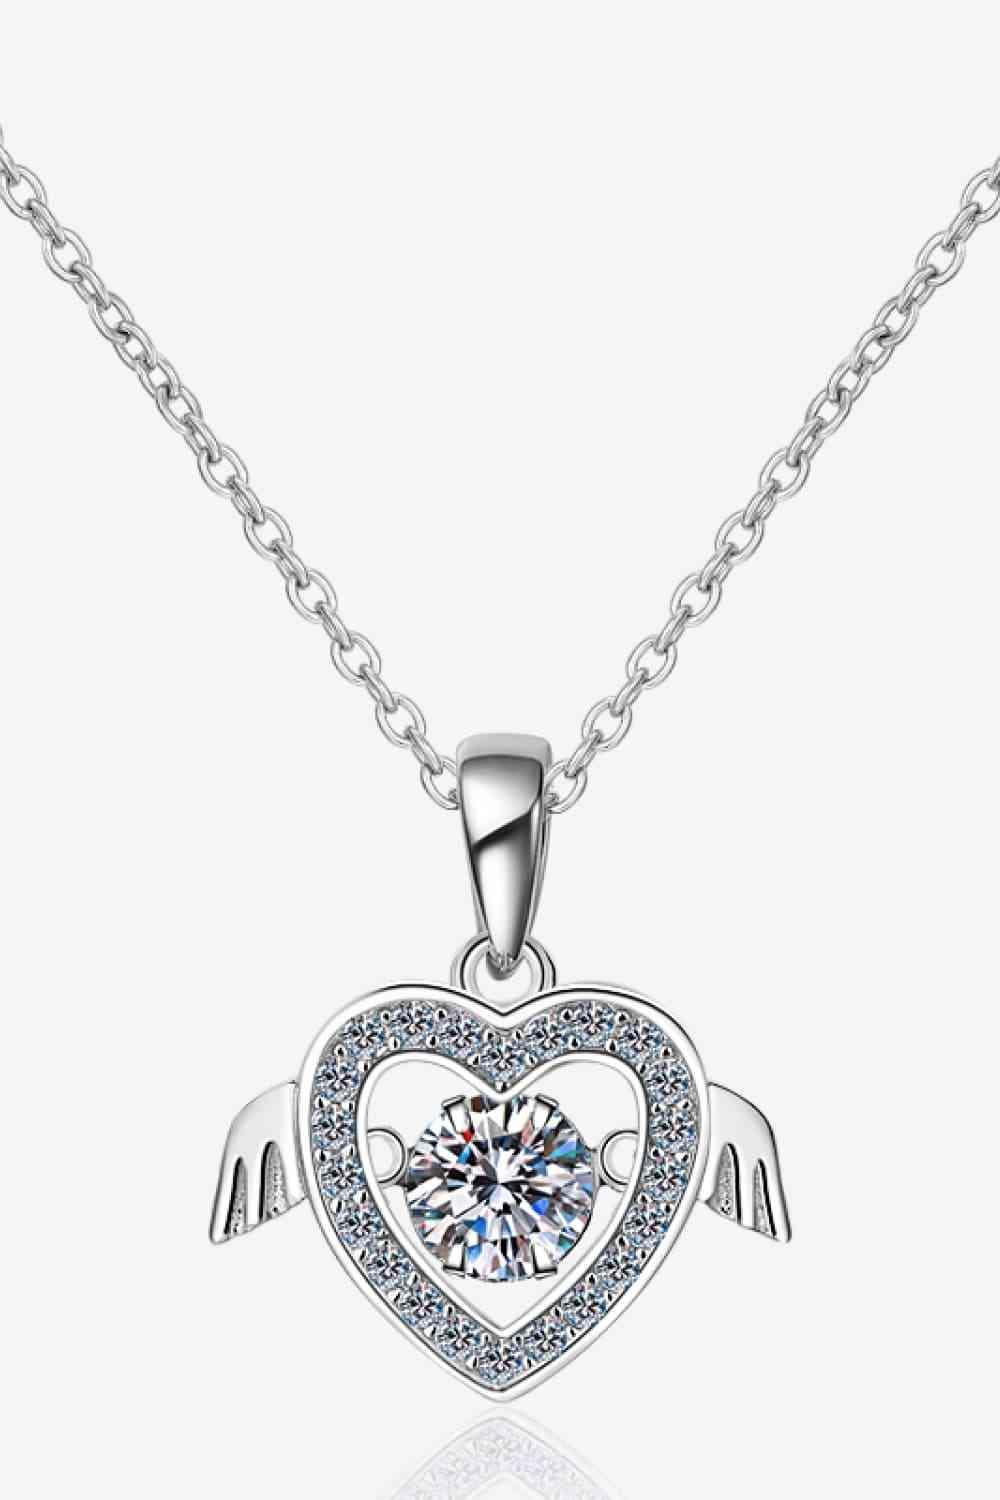 a necklace with a heart and wings on it